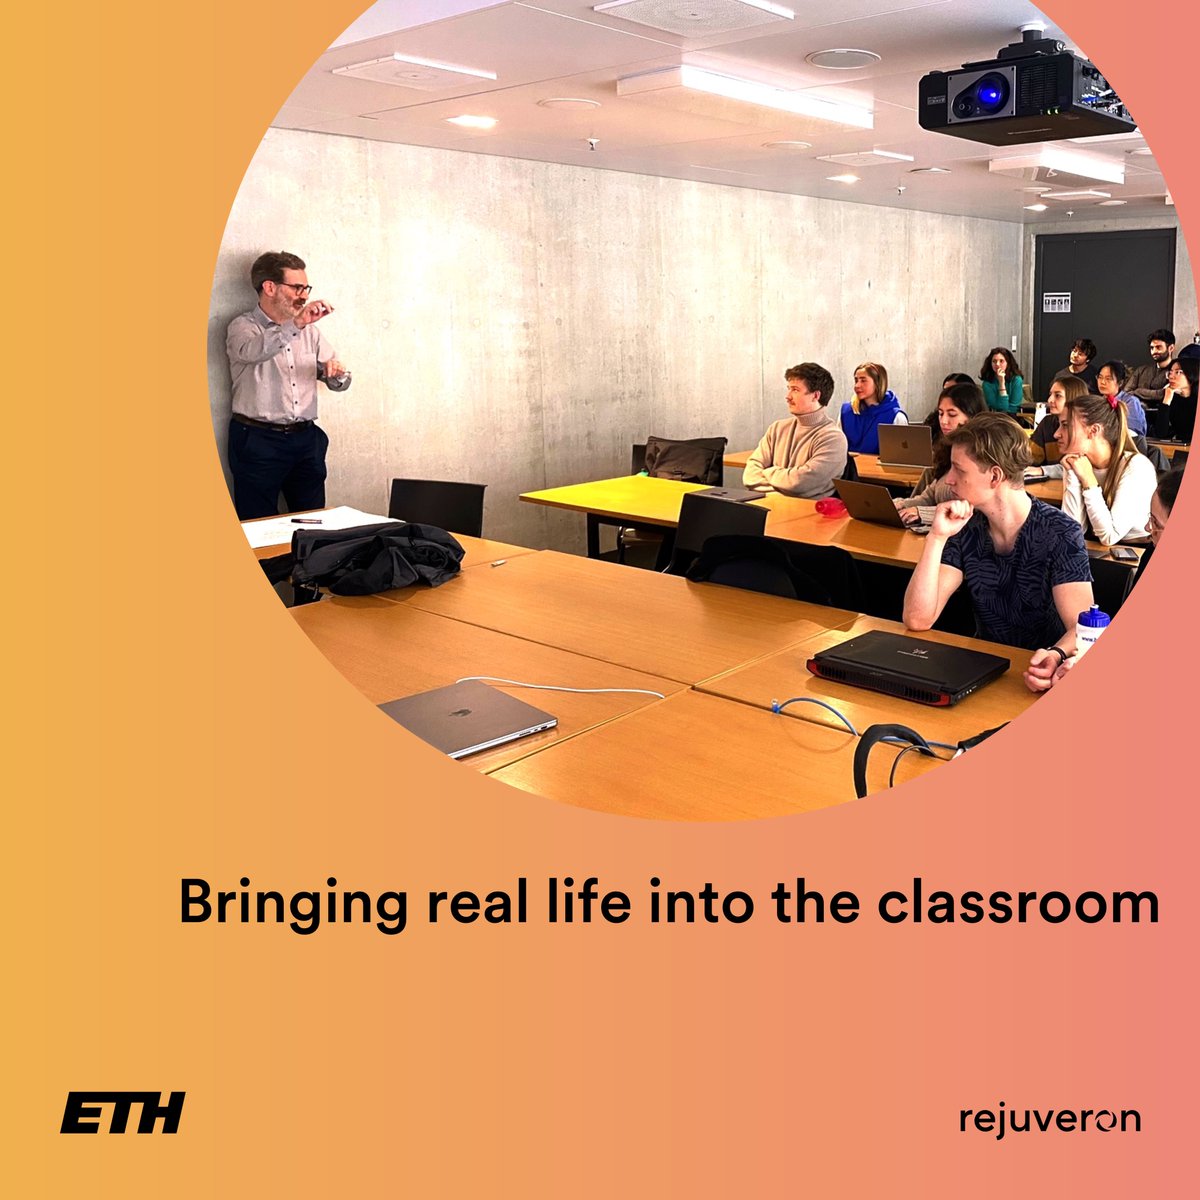 Young minds! Eager to learn and grow. @mitomedicineman provided insightful feedback on students’ pitches at @ETH_en. We were amazed by the innovative ideas presented at “#Translation of Basic #Research Findings from Genetics and Molecular Mechanisms of #Aging”.